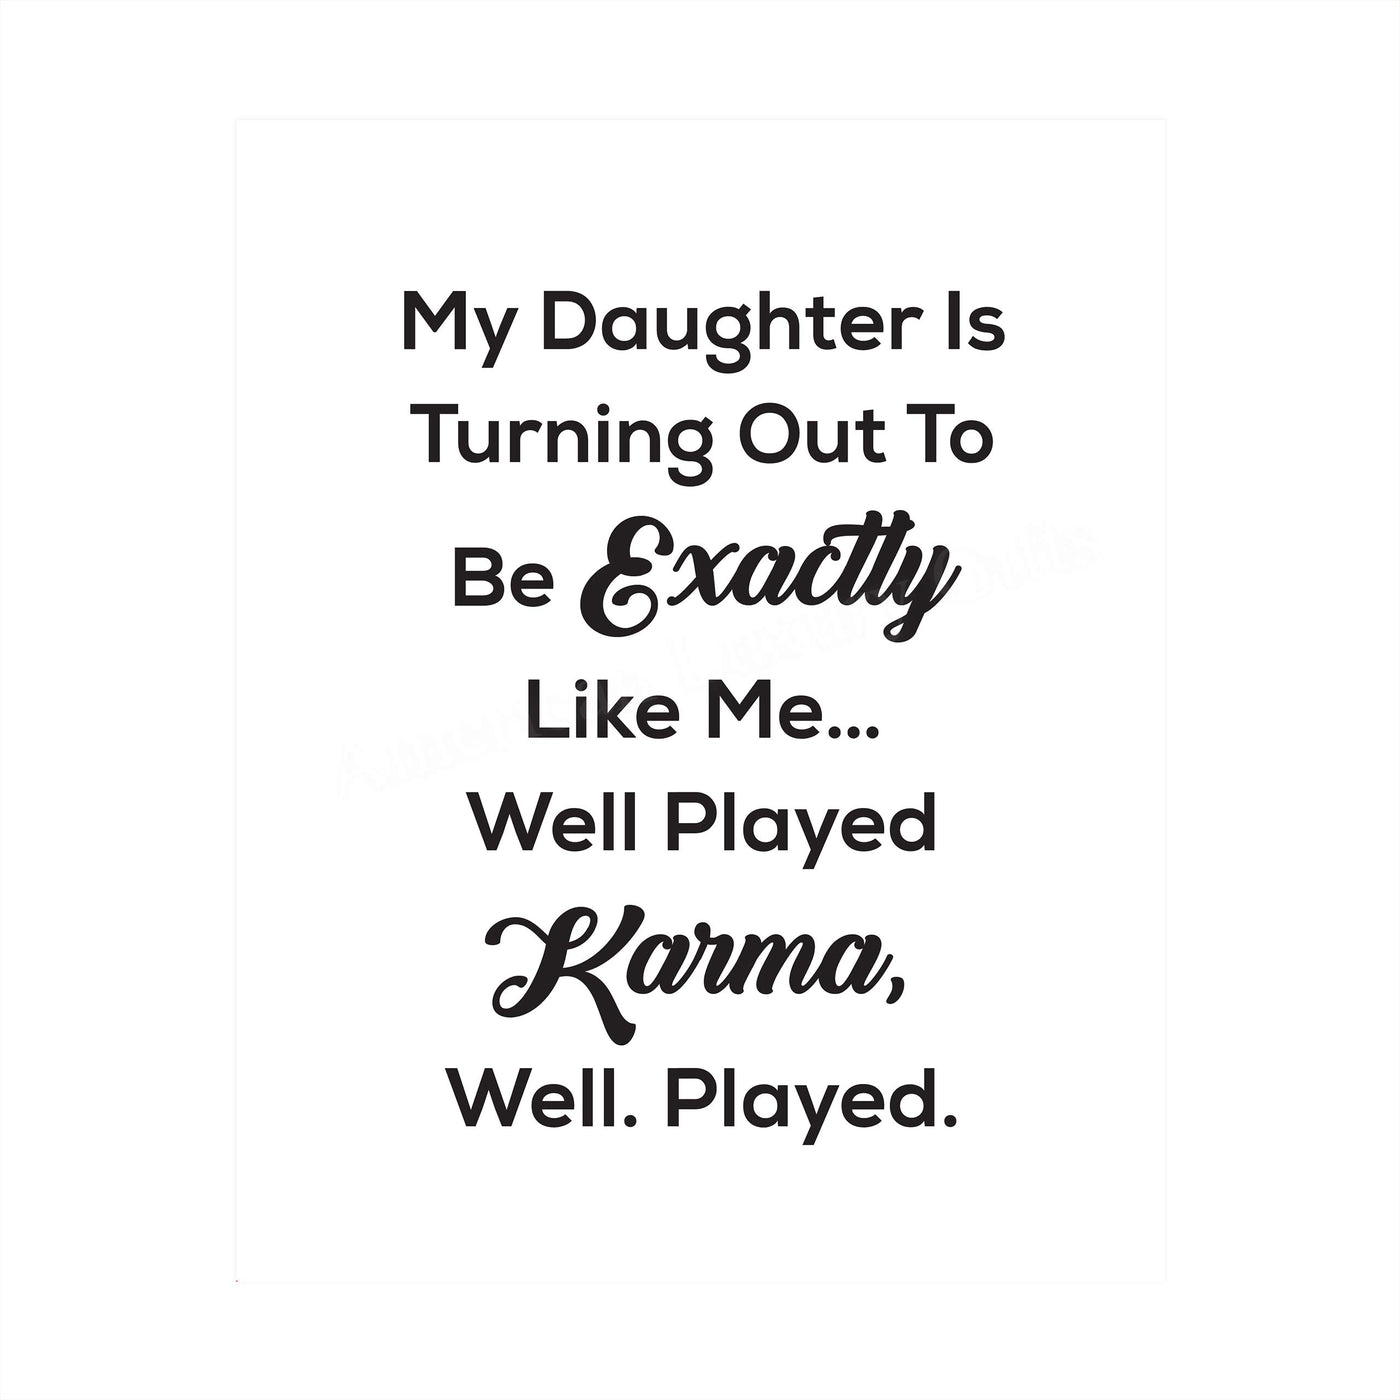 My Daughter Turning Out Like Me-Well Played Karma Funny Wall Art Sign -8 x 10" Sarcastic Poster Print-Ready to Frame. Humorous Decor for Home-Office-Studio-She Shed-Cave. Fun Novelty Gift!